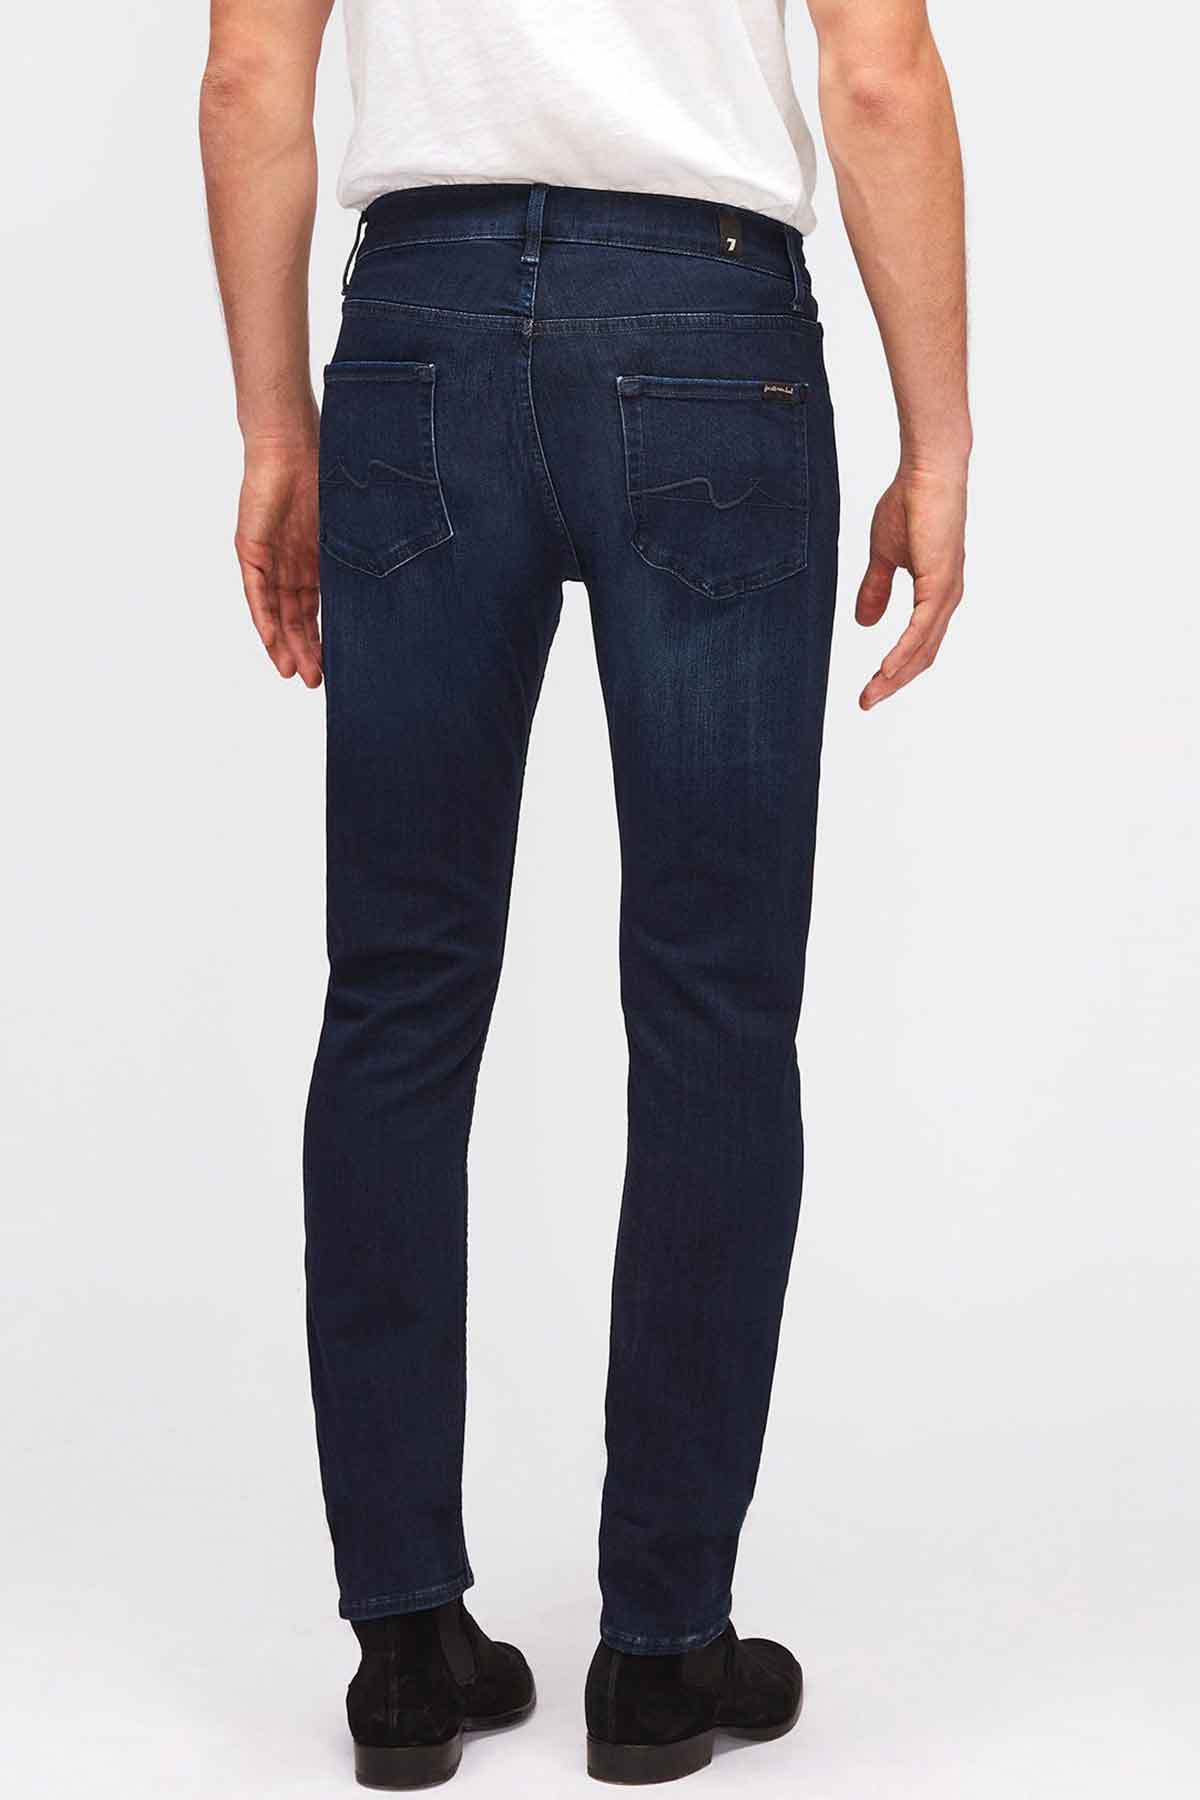 7 For All Mankind Slimmy Tapered Fit Super Stretch Jeans-Libas Trendy Fashion Store